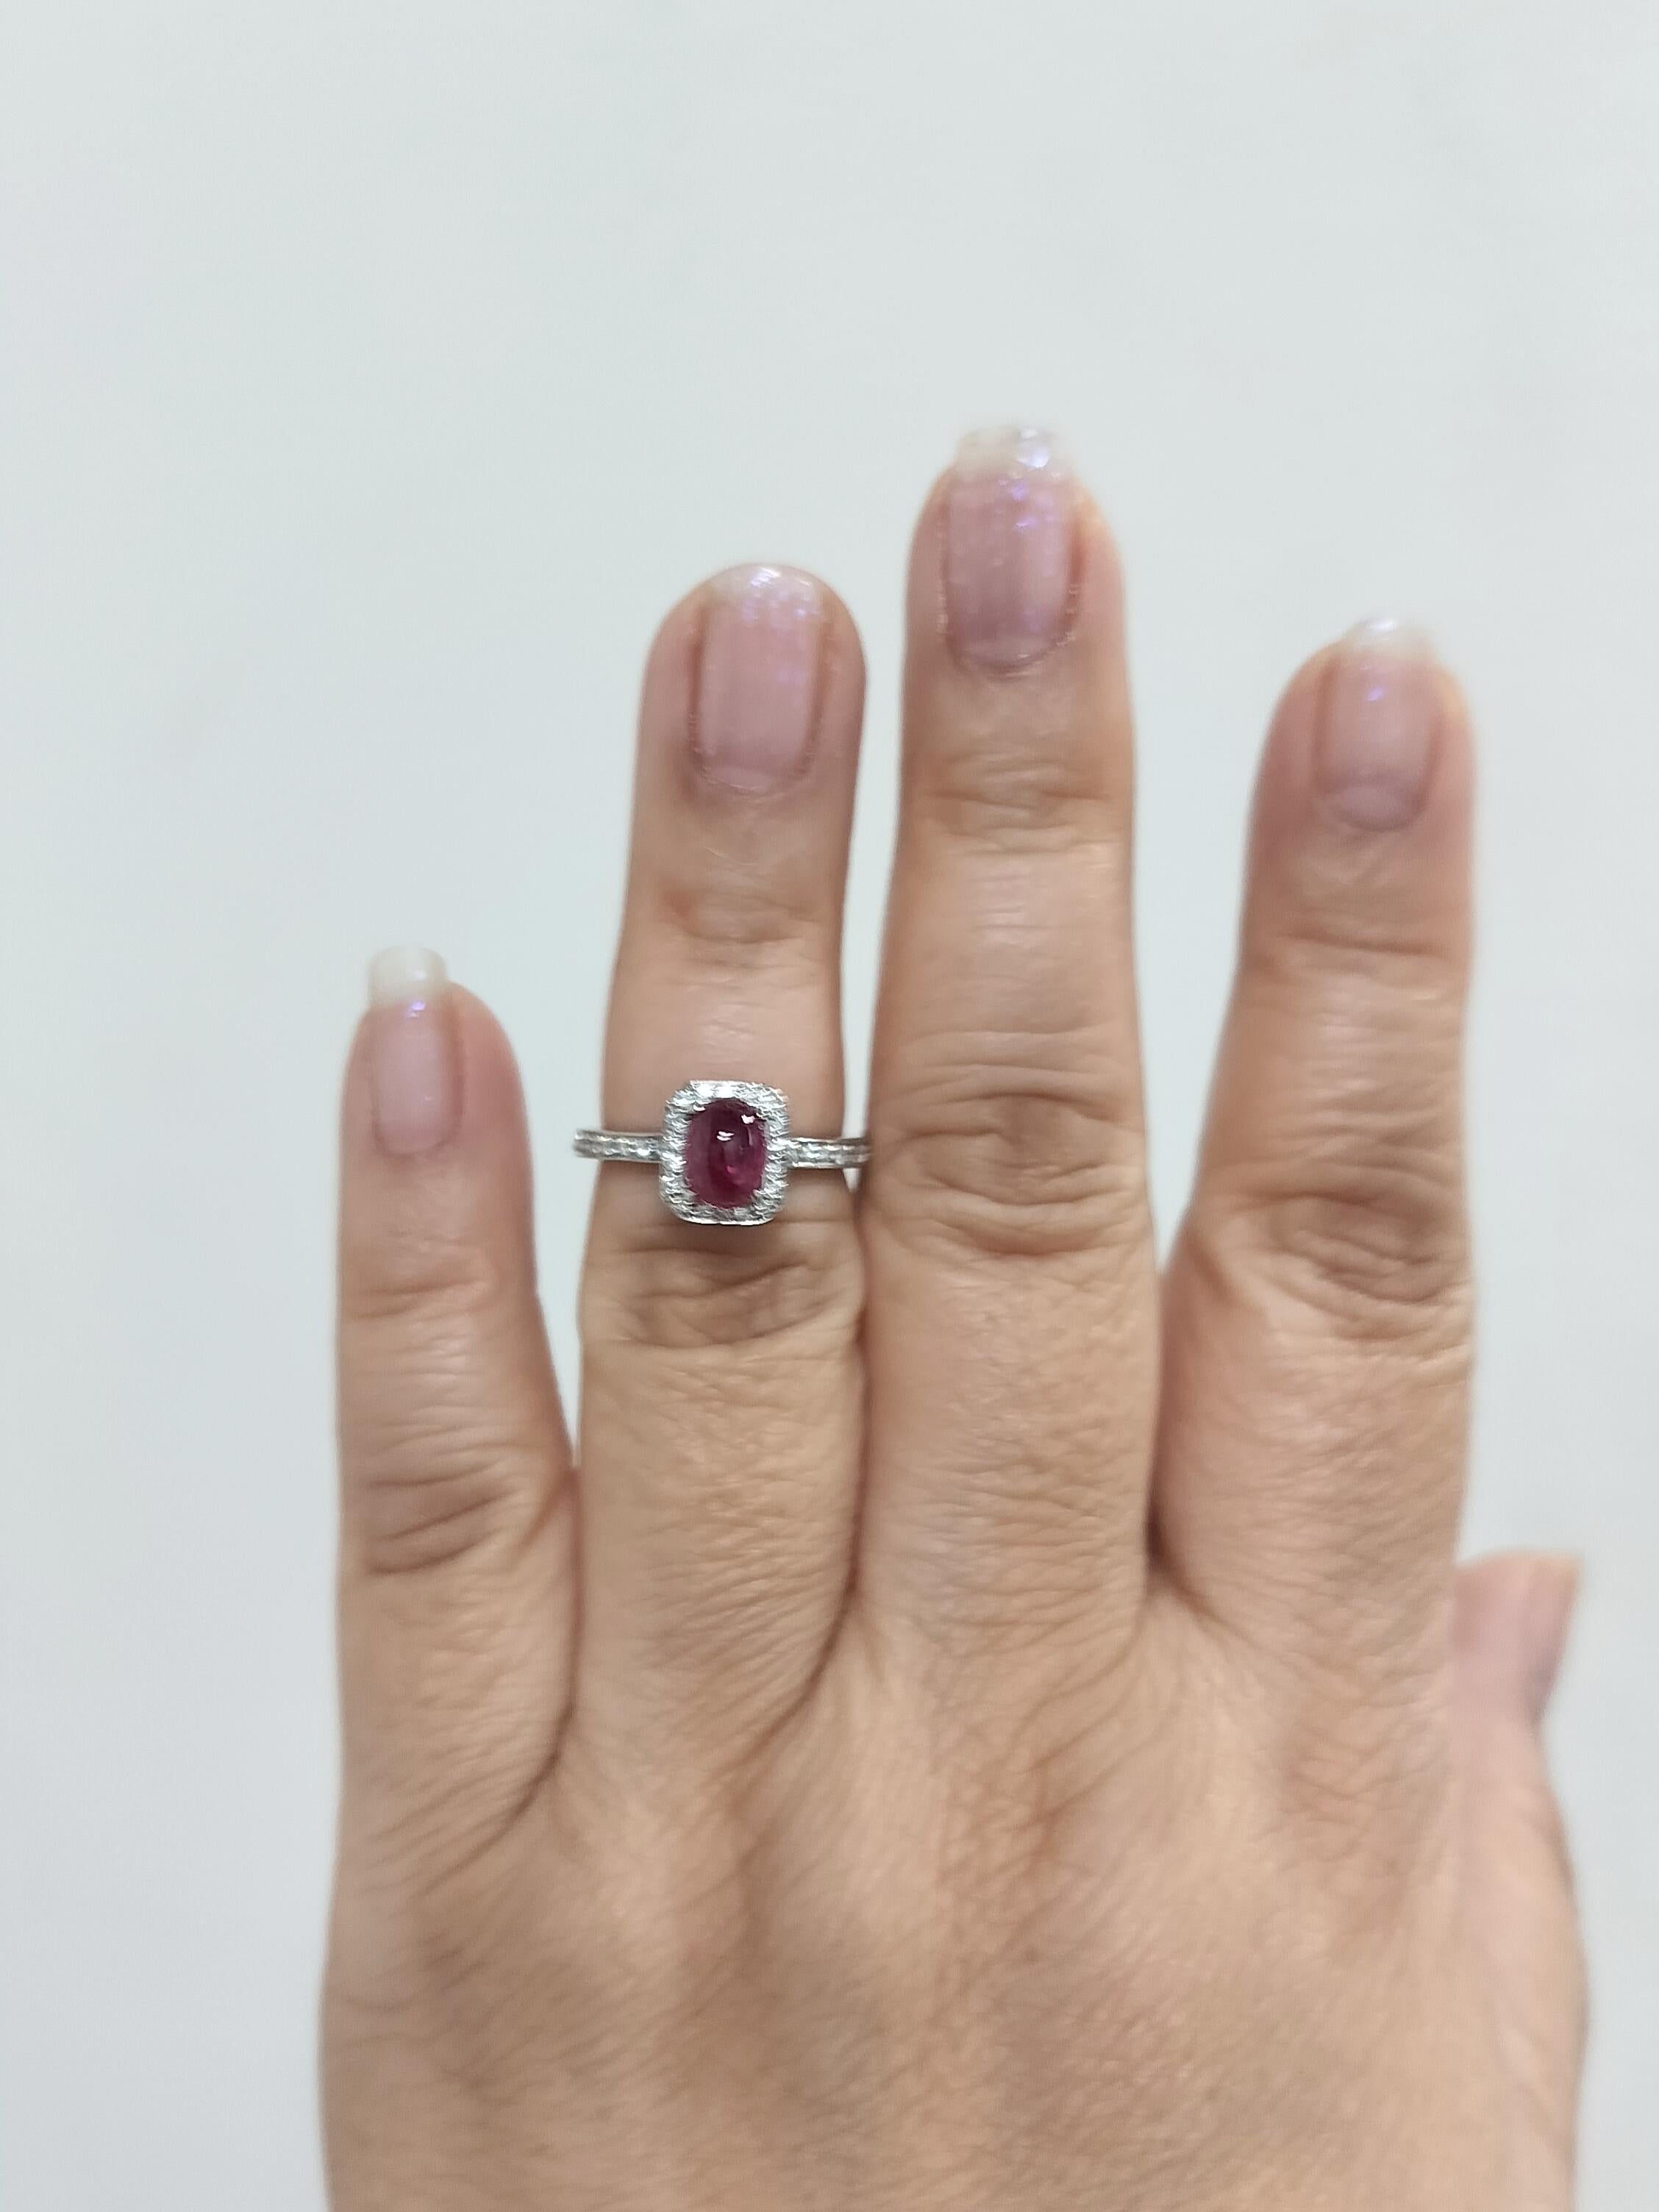 Beautiful 1.61 ct. red ruby oval cabochon with 0.18 ct. white diamond rounds.  Handmade in platinum.  Ring size 6.5.